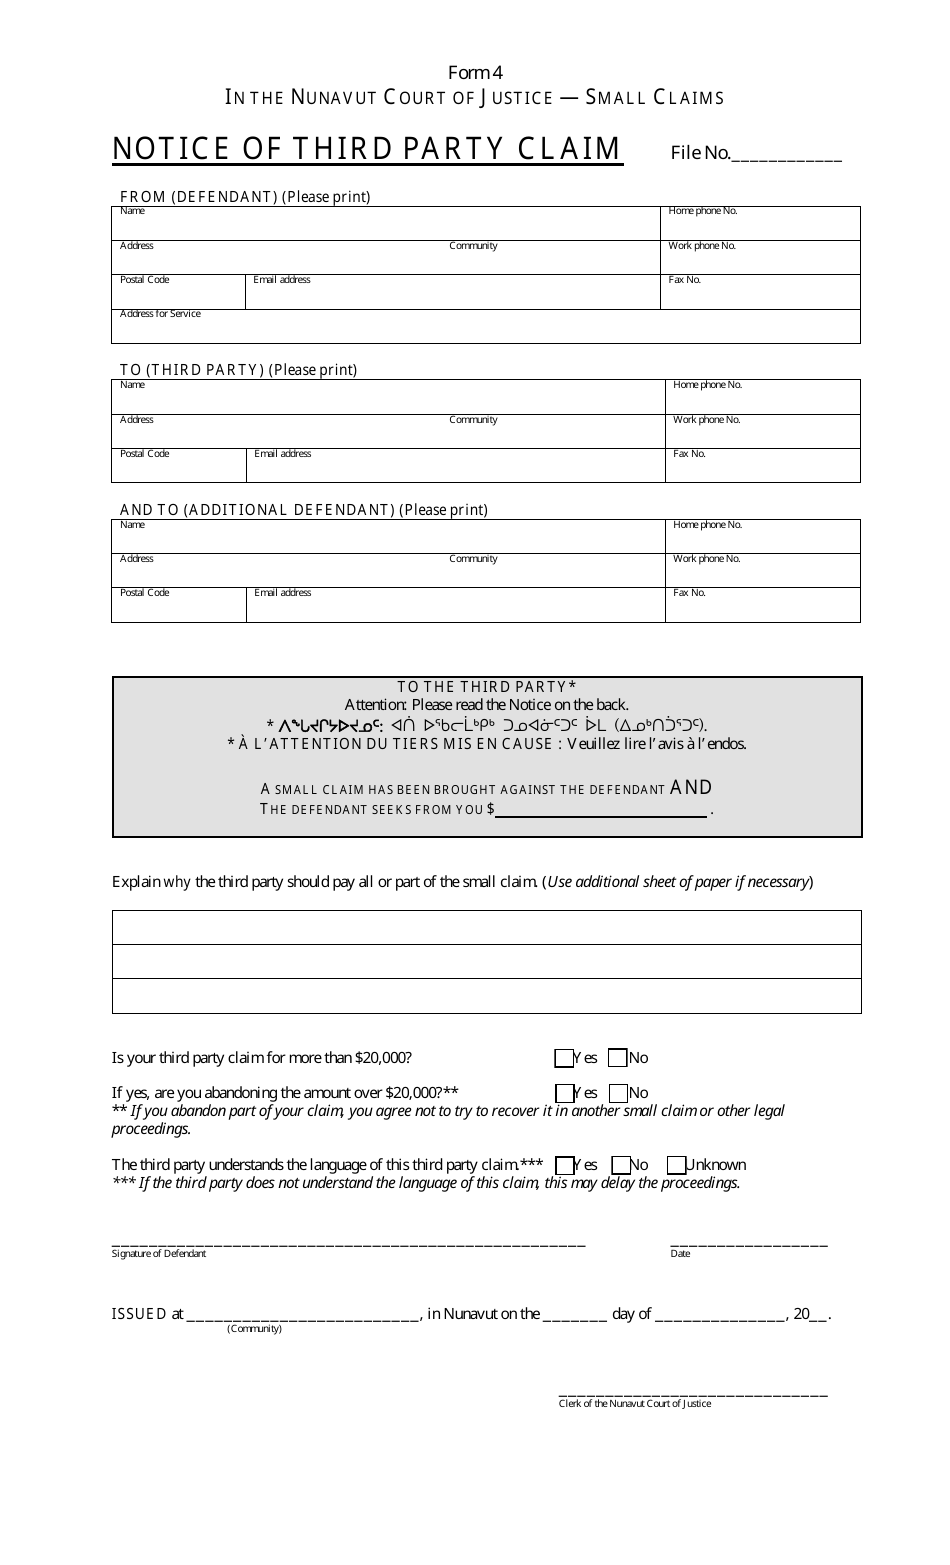 Form 4 Notice of Third Party Claim - Nunavut, Canada, Page 1